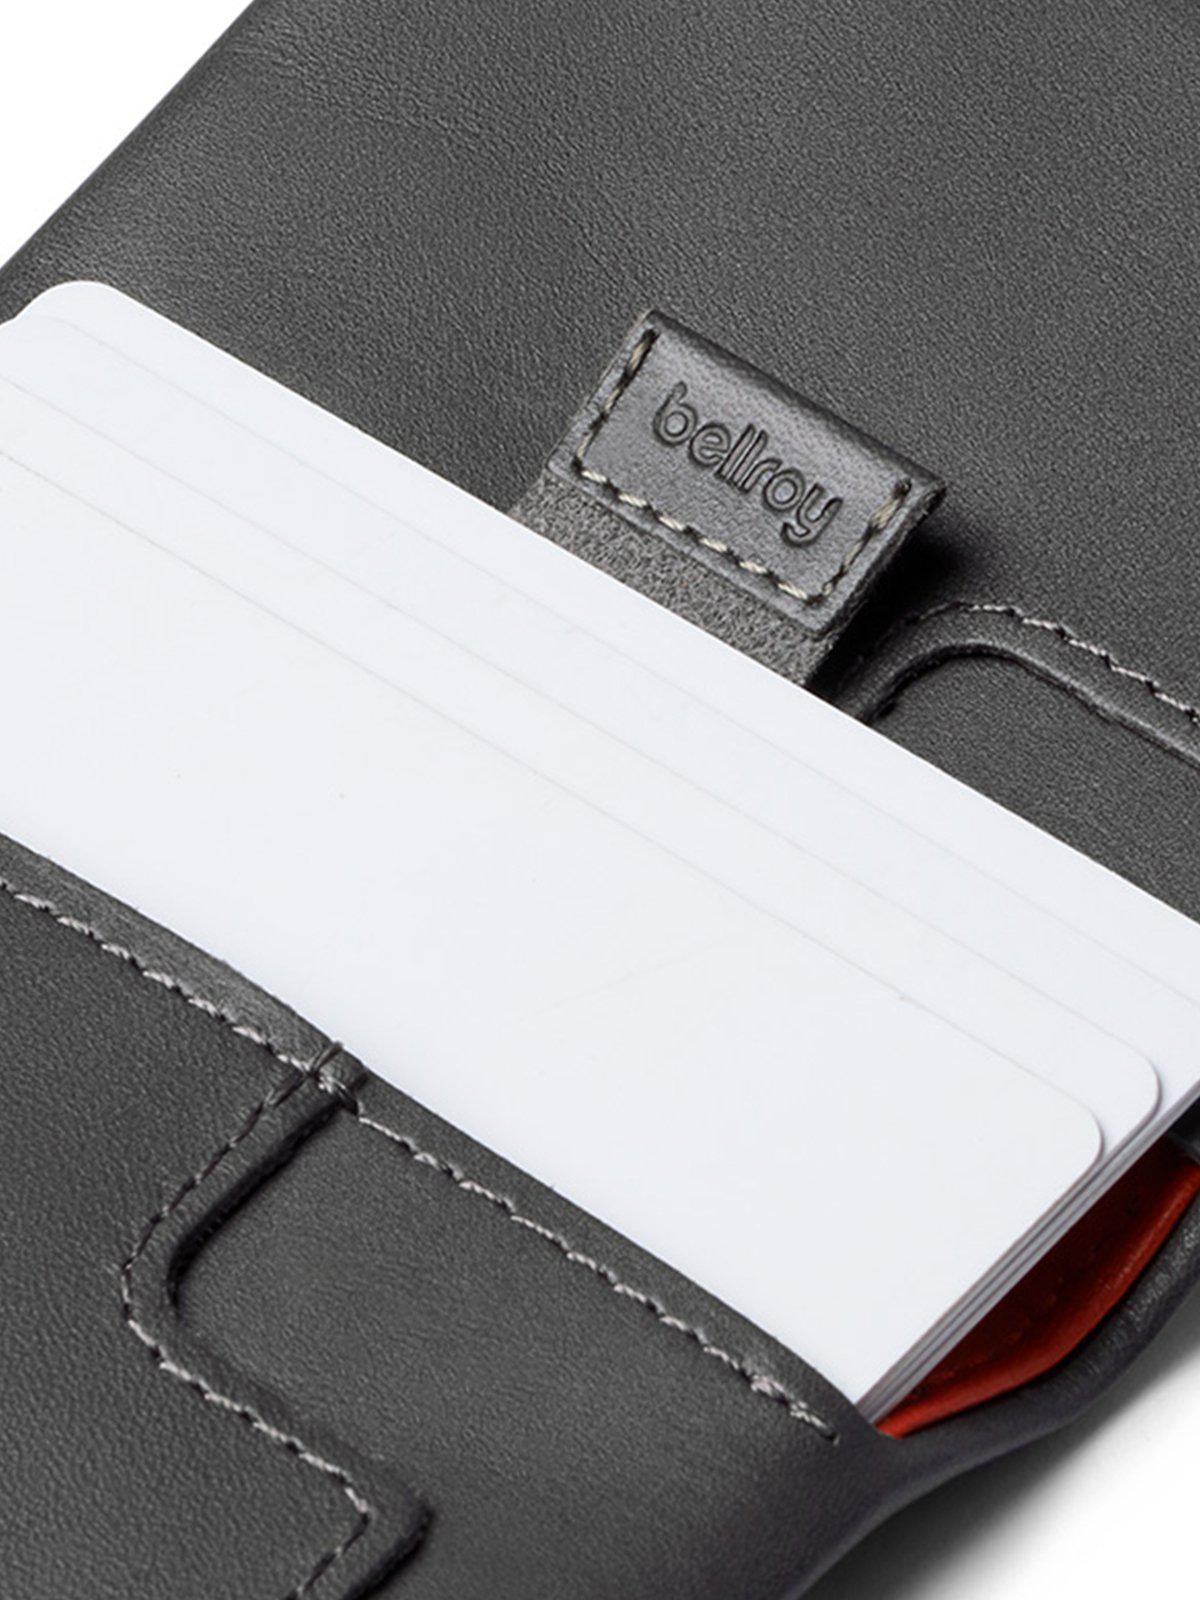 Bellroy Slim Sleeve Wallet Charcoal - MORE by Morello Indonesia